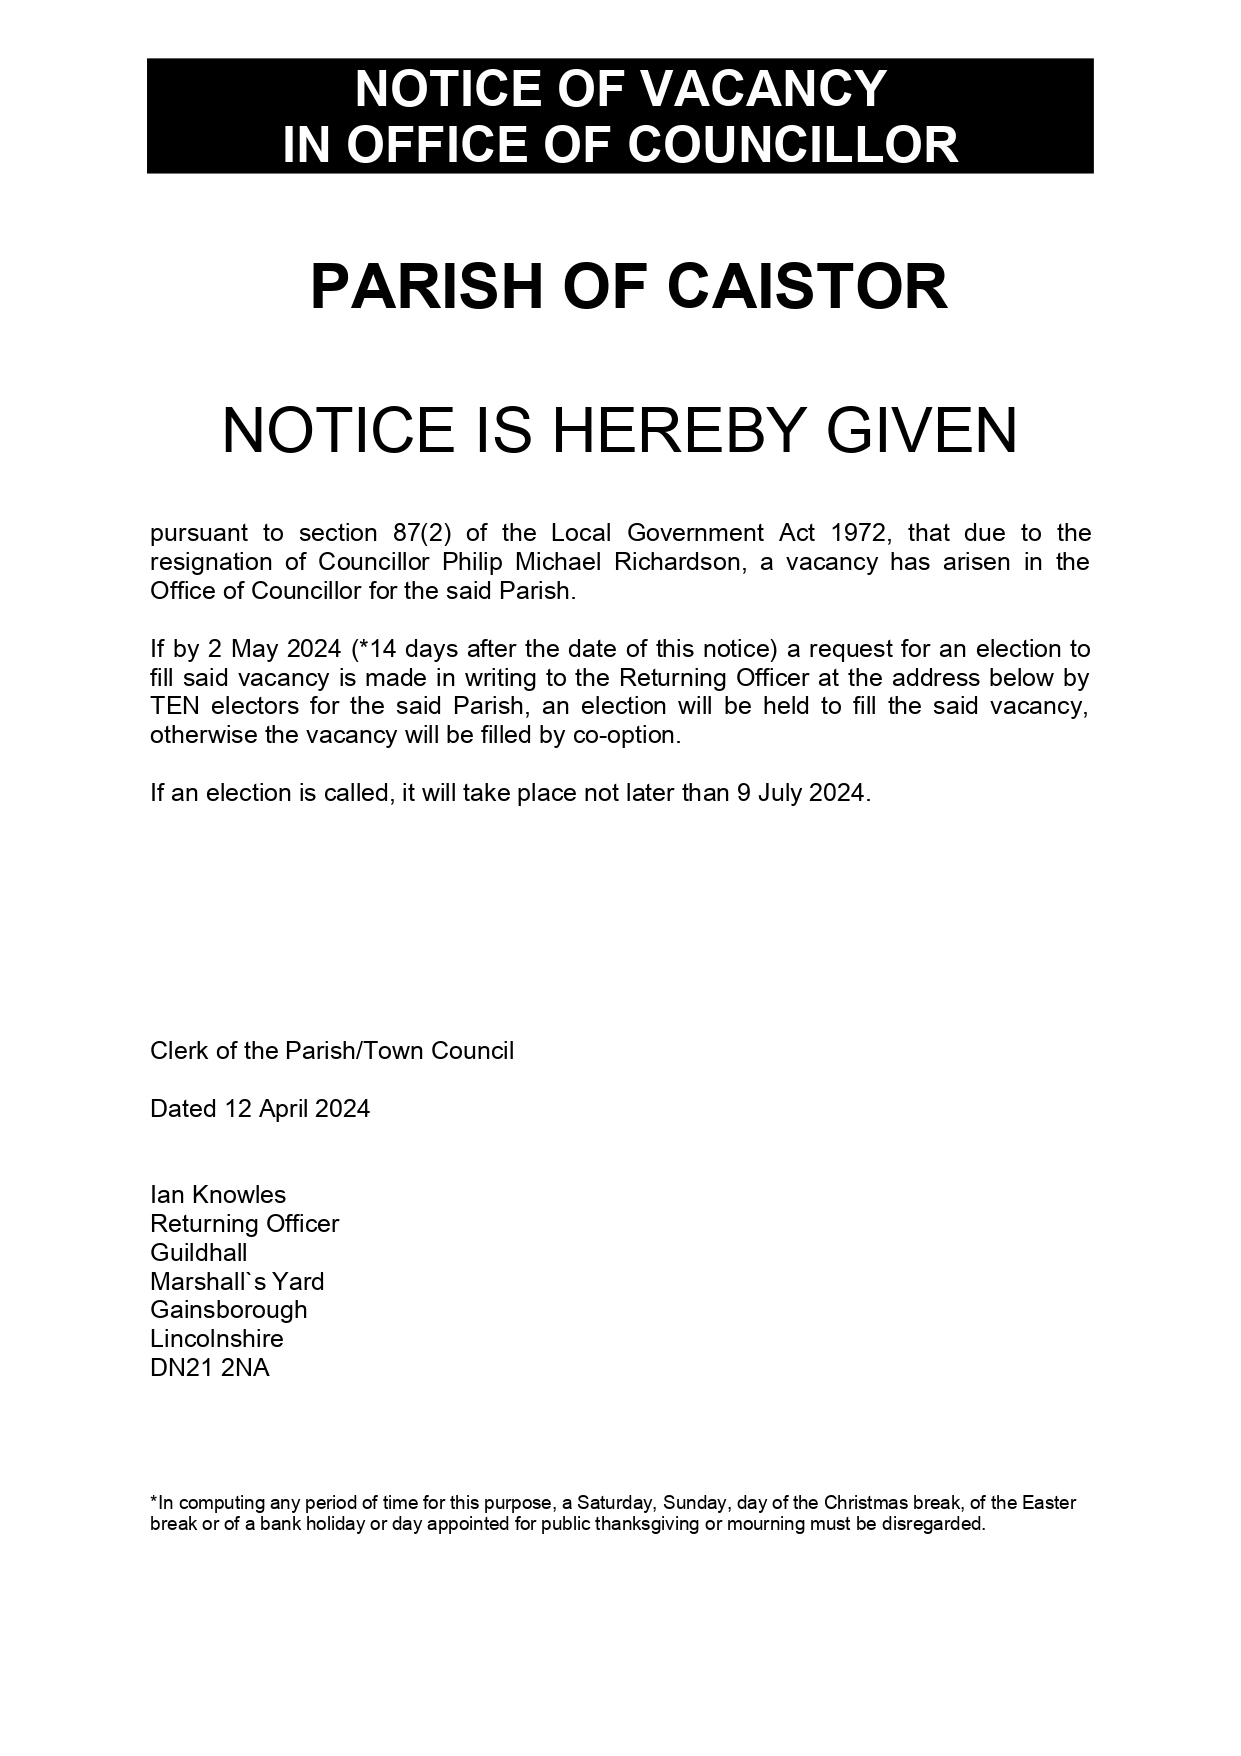  

PARISH OF CAISTOR
NOTICE IS HEREBY GIVEN
pursuant to section 87(2) of the Local Government Act 1972, that due to the resignation of Councillor Philip Michael Richardson, a vacancy has arisen in the Office of Councillor for the said Parish.
If by 2 May 